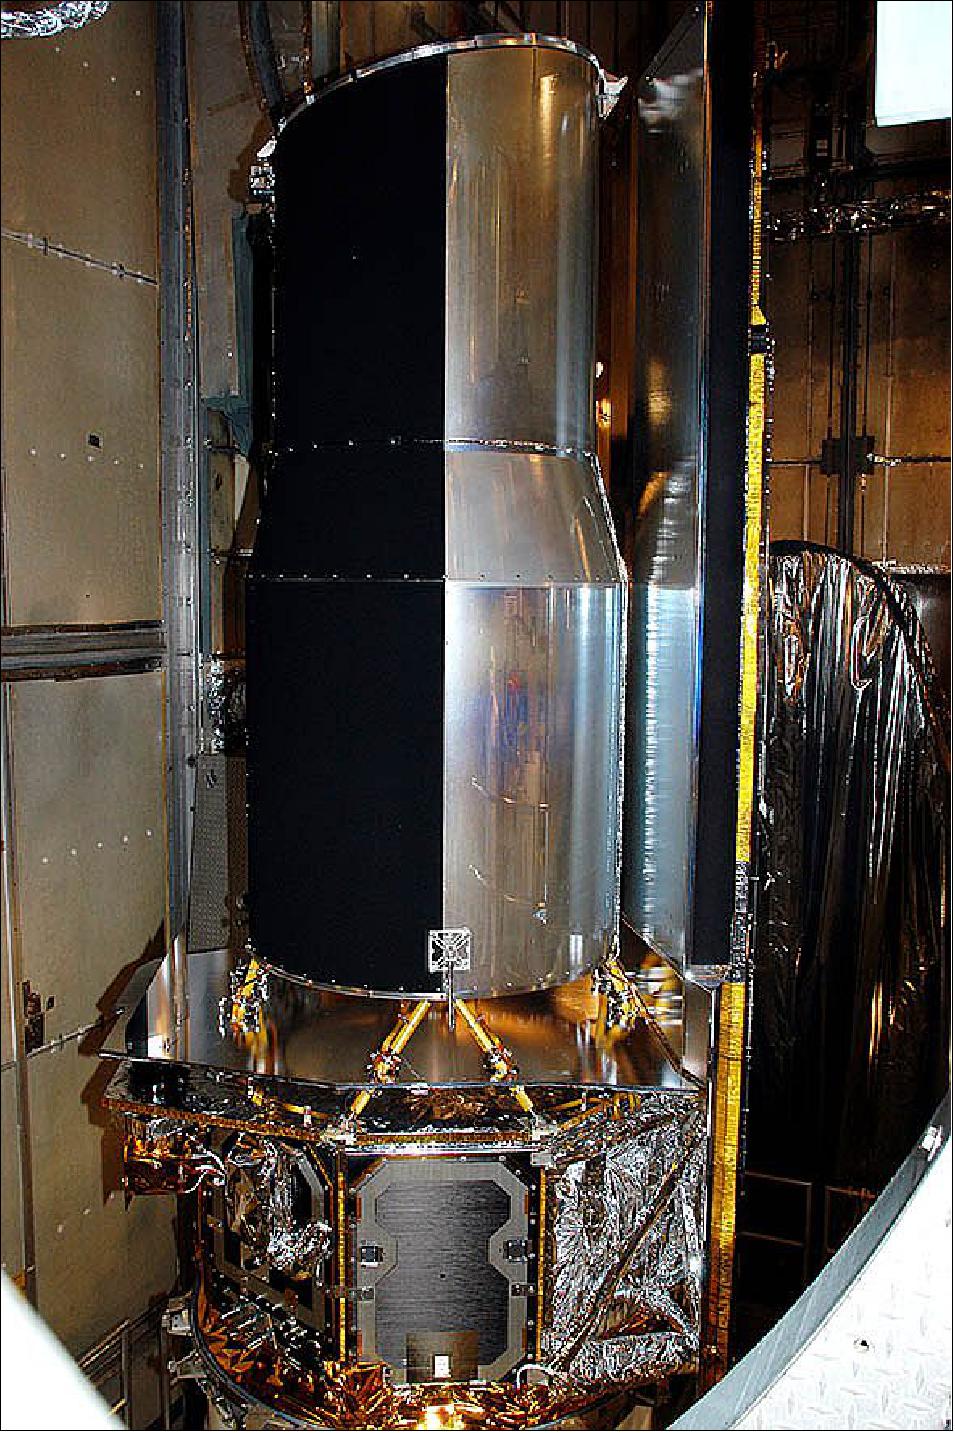 Figure 35: At the time of launch, the Spitzer Space Telescope bore its original name: the Space Infrared Telescope Facility (SIRTF). It's shown here in the mobile service tower on Launch (image credit: NASA/JPL-Caltech)